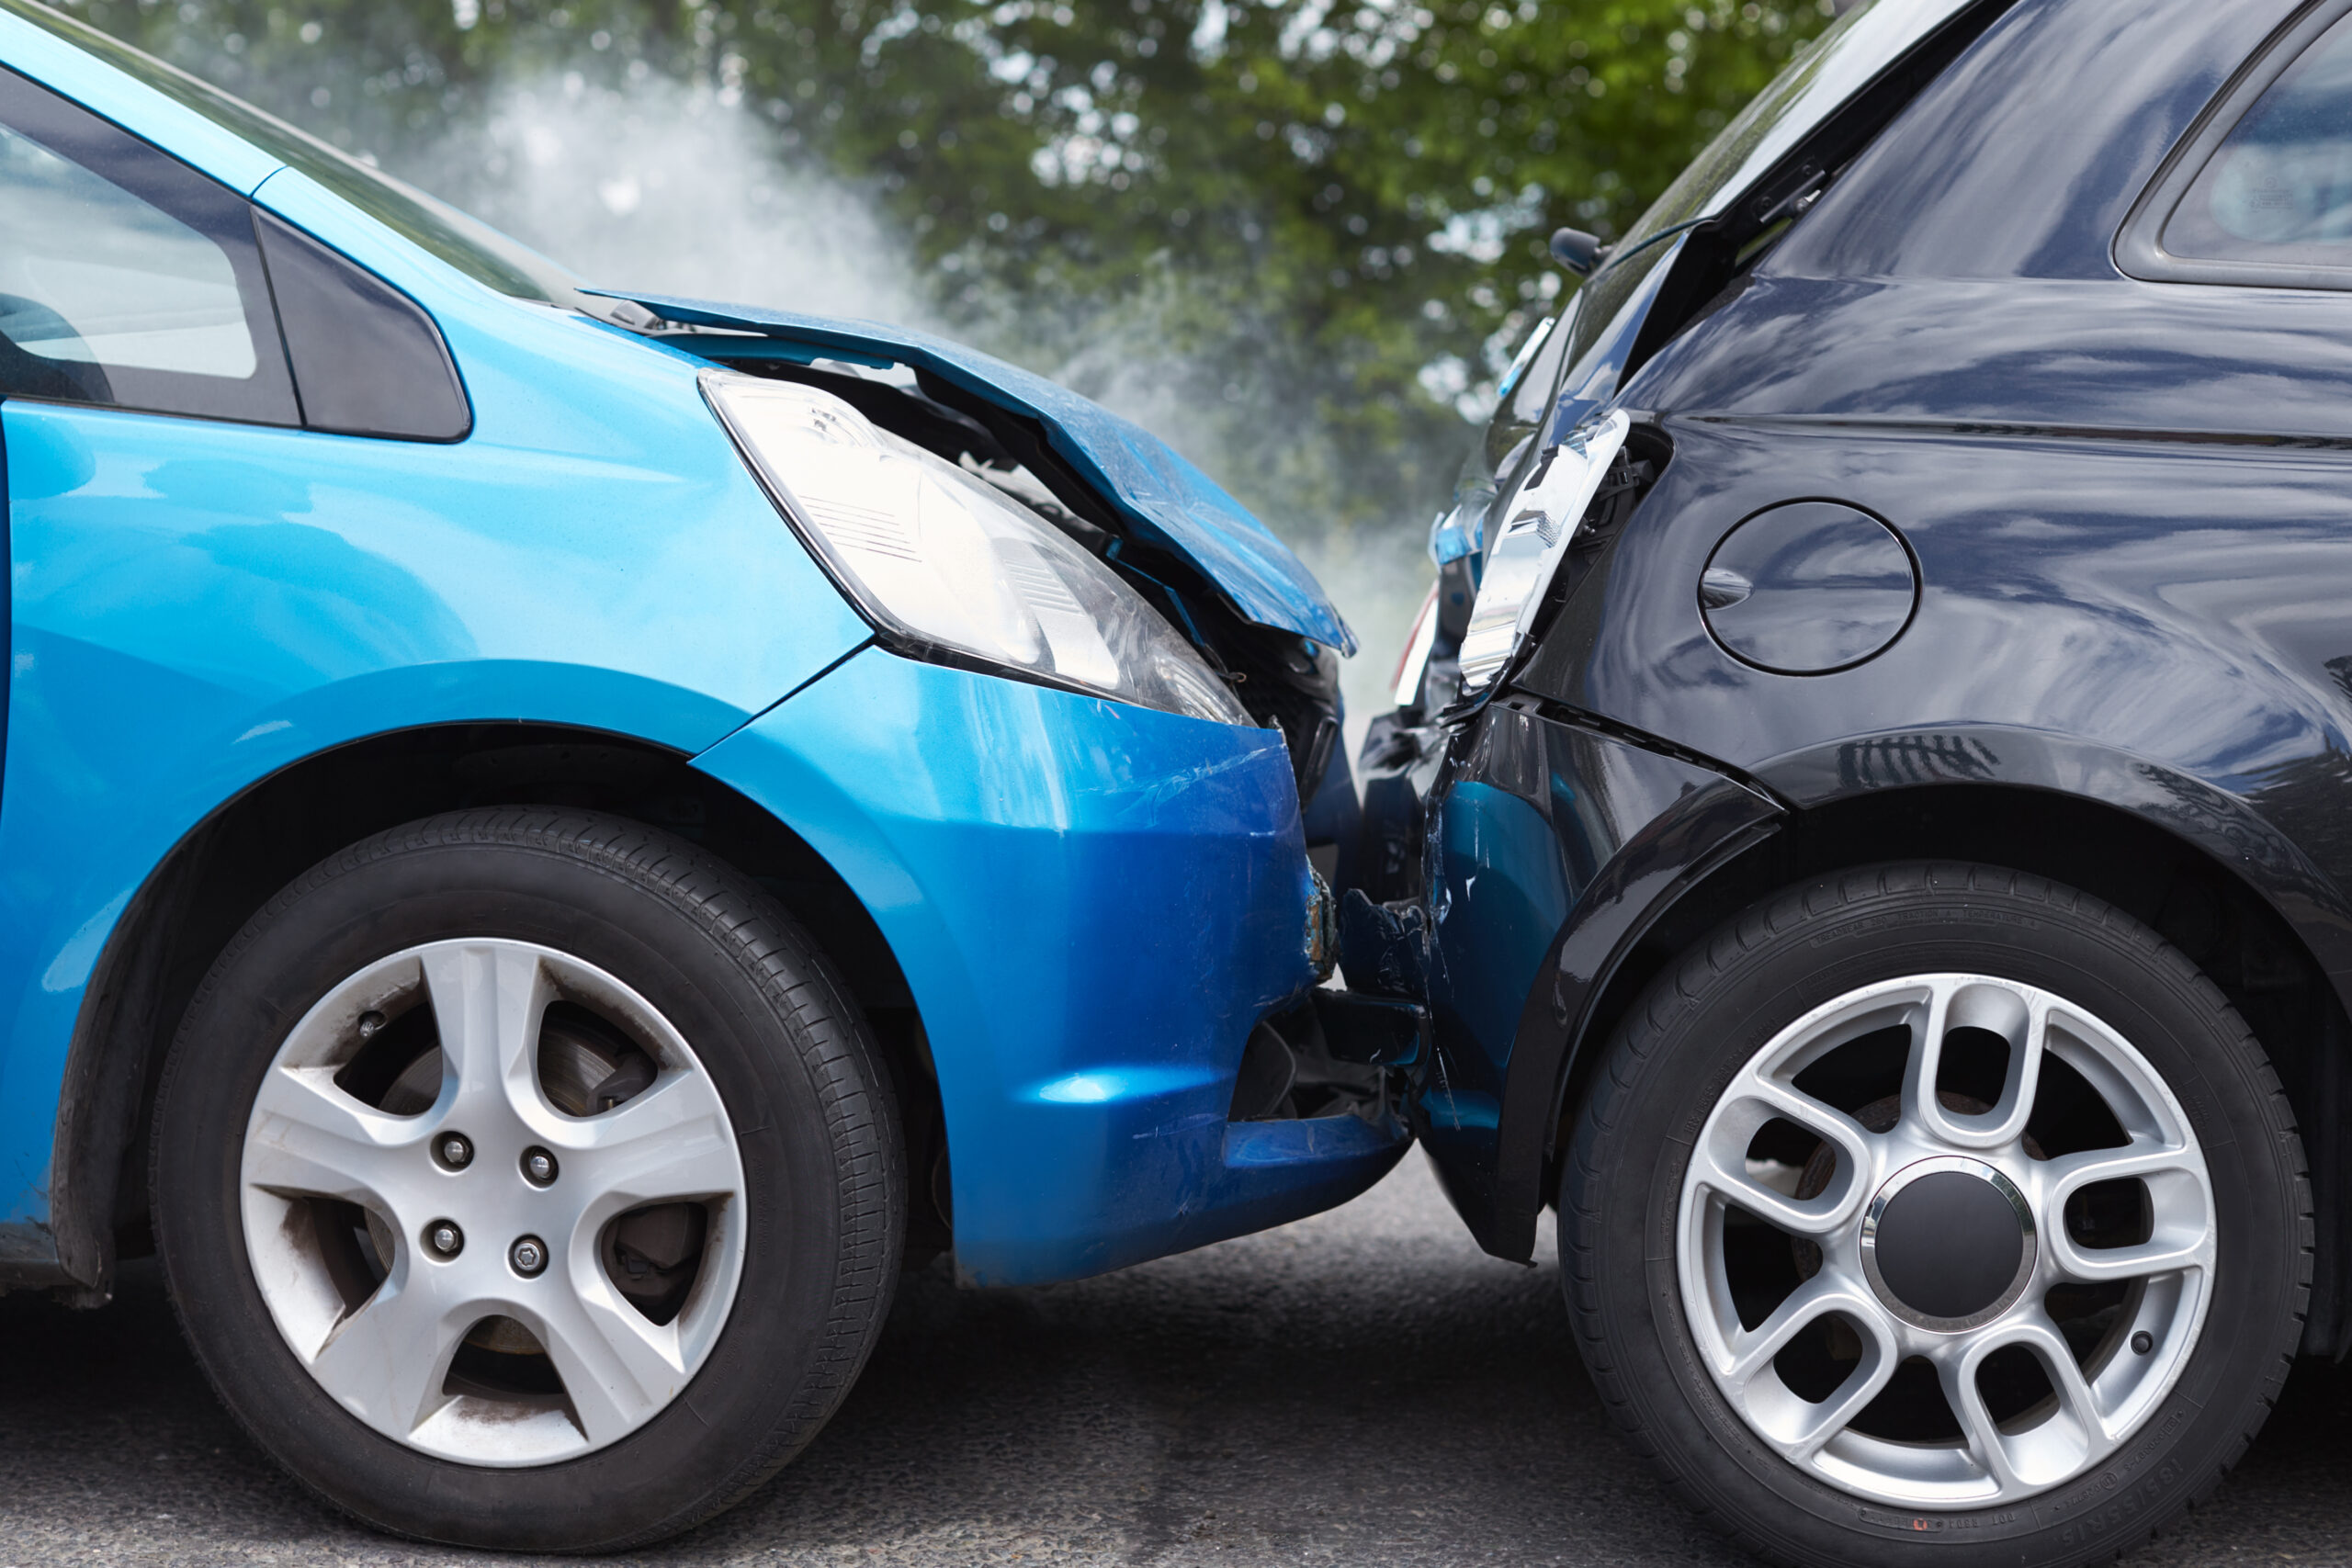 What to Expect After a Car Accident